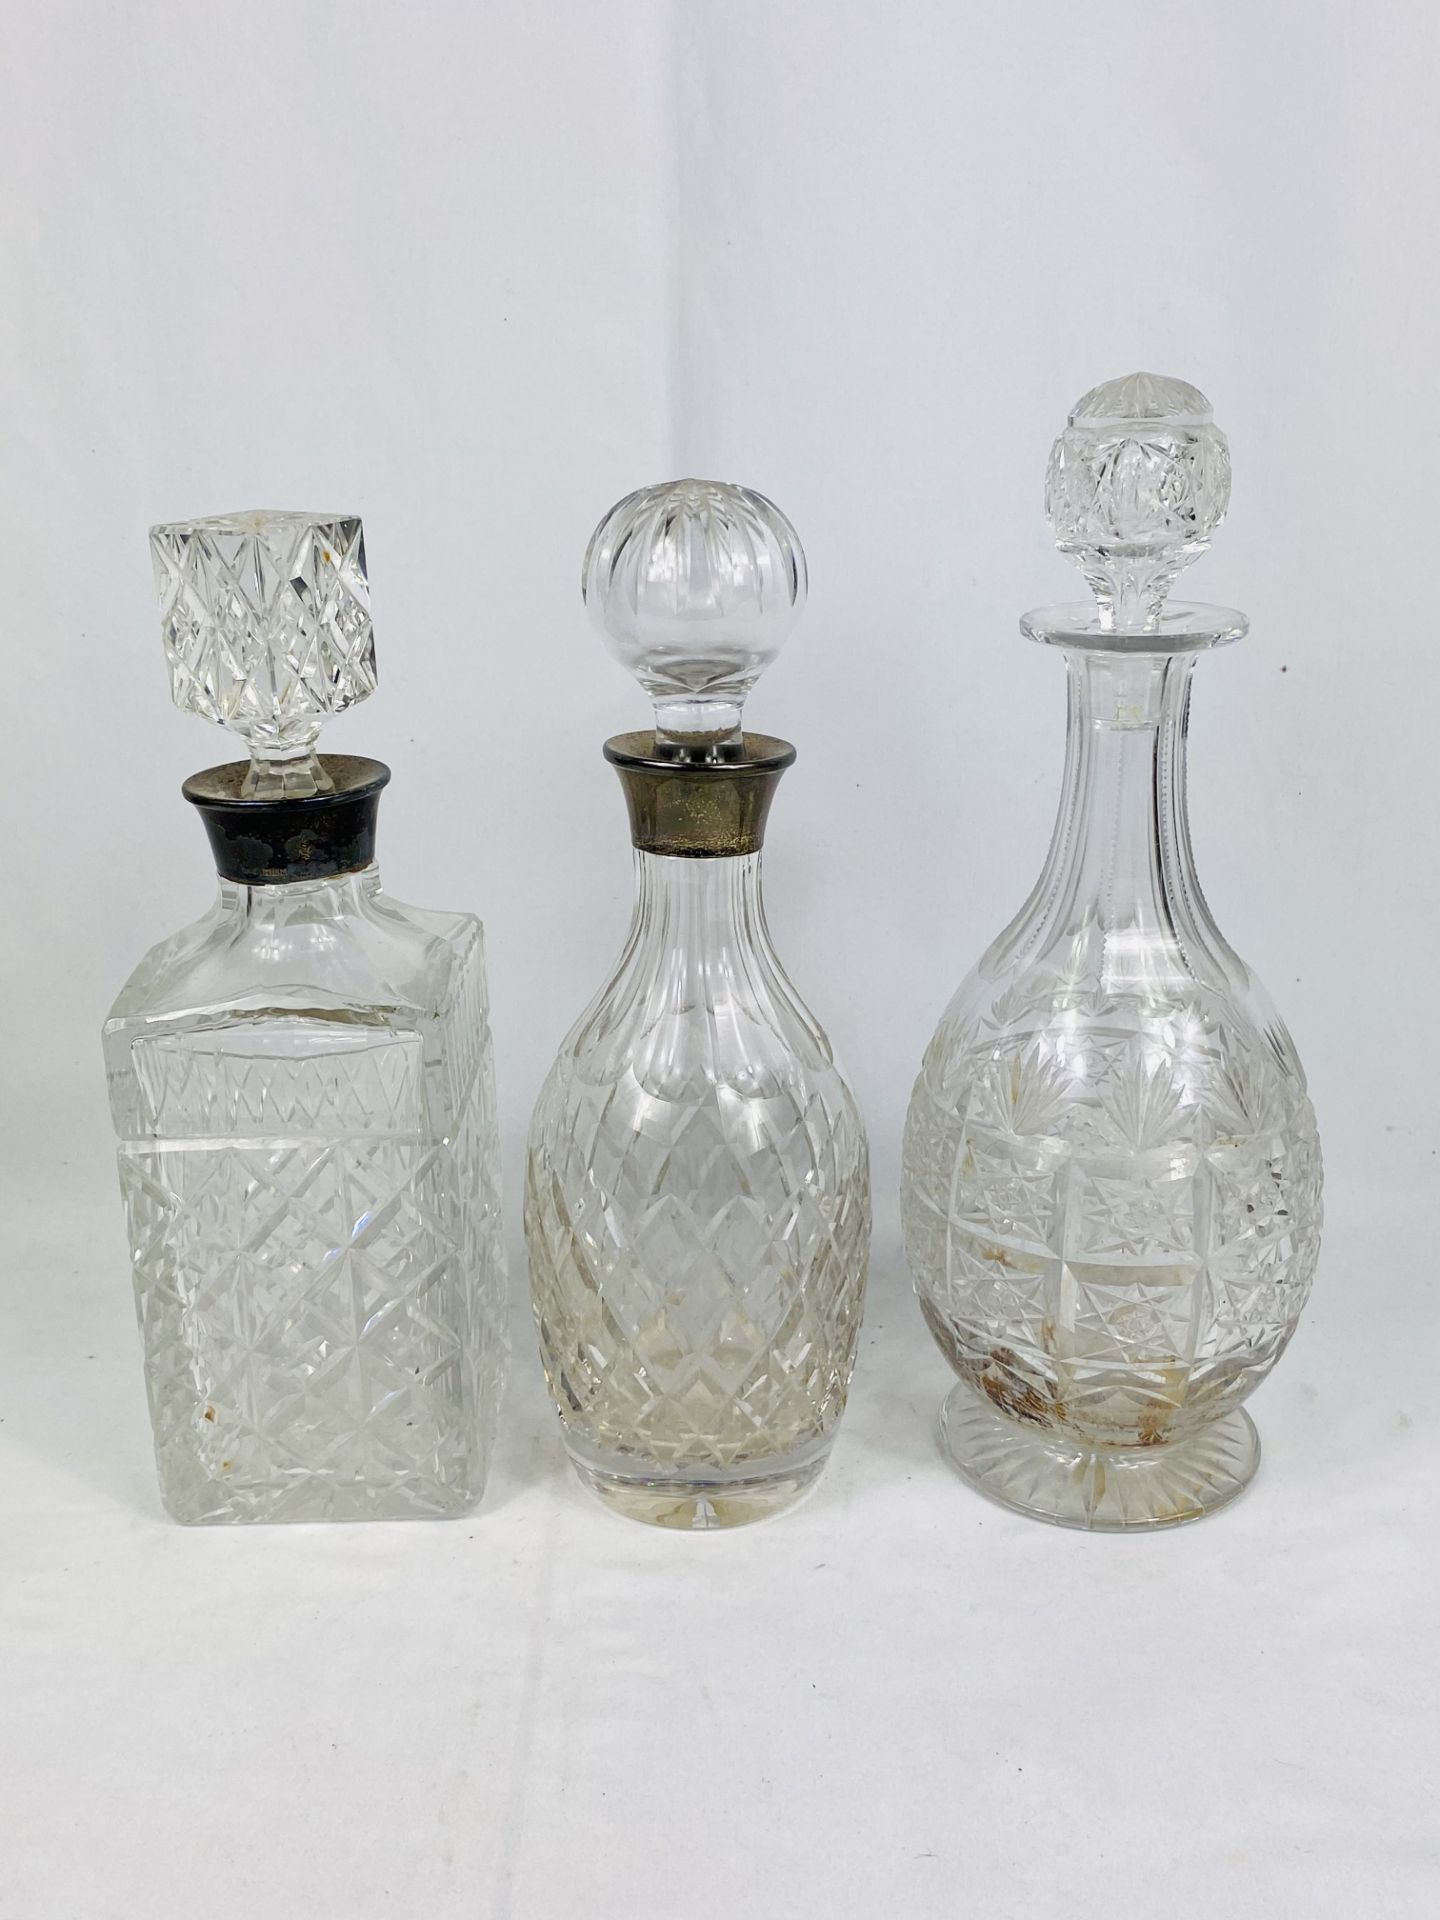 Two cut glass decanters with silver collars and a cut glass decanter